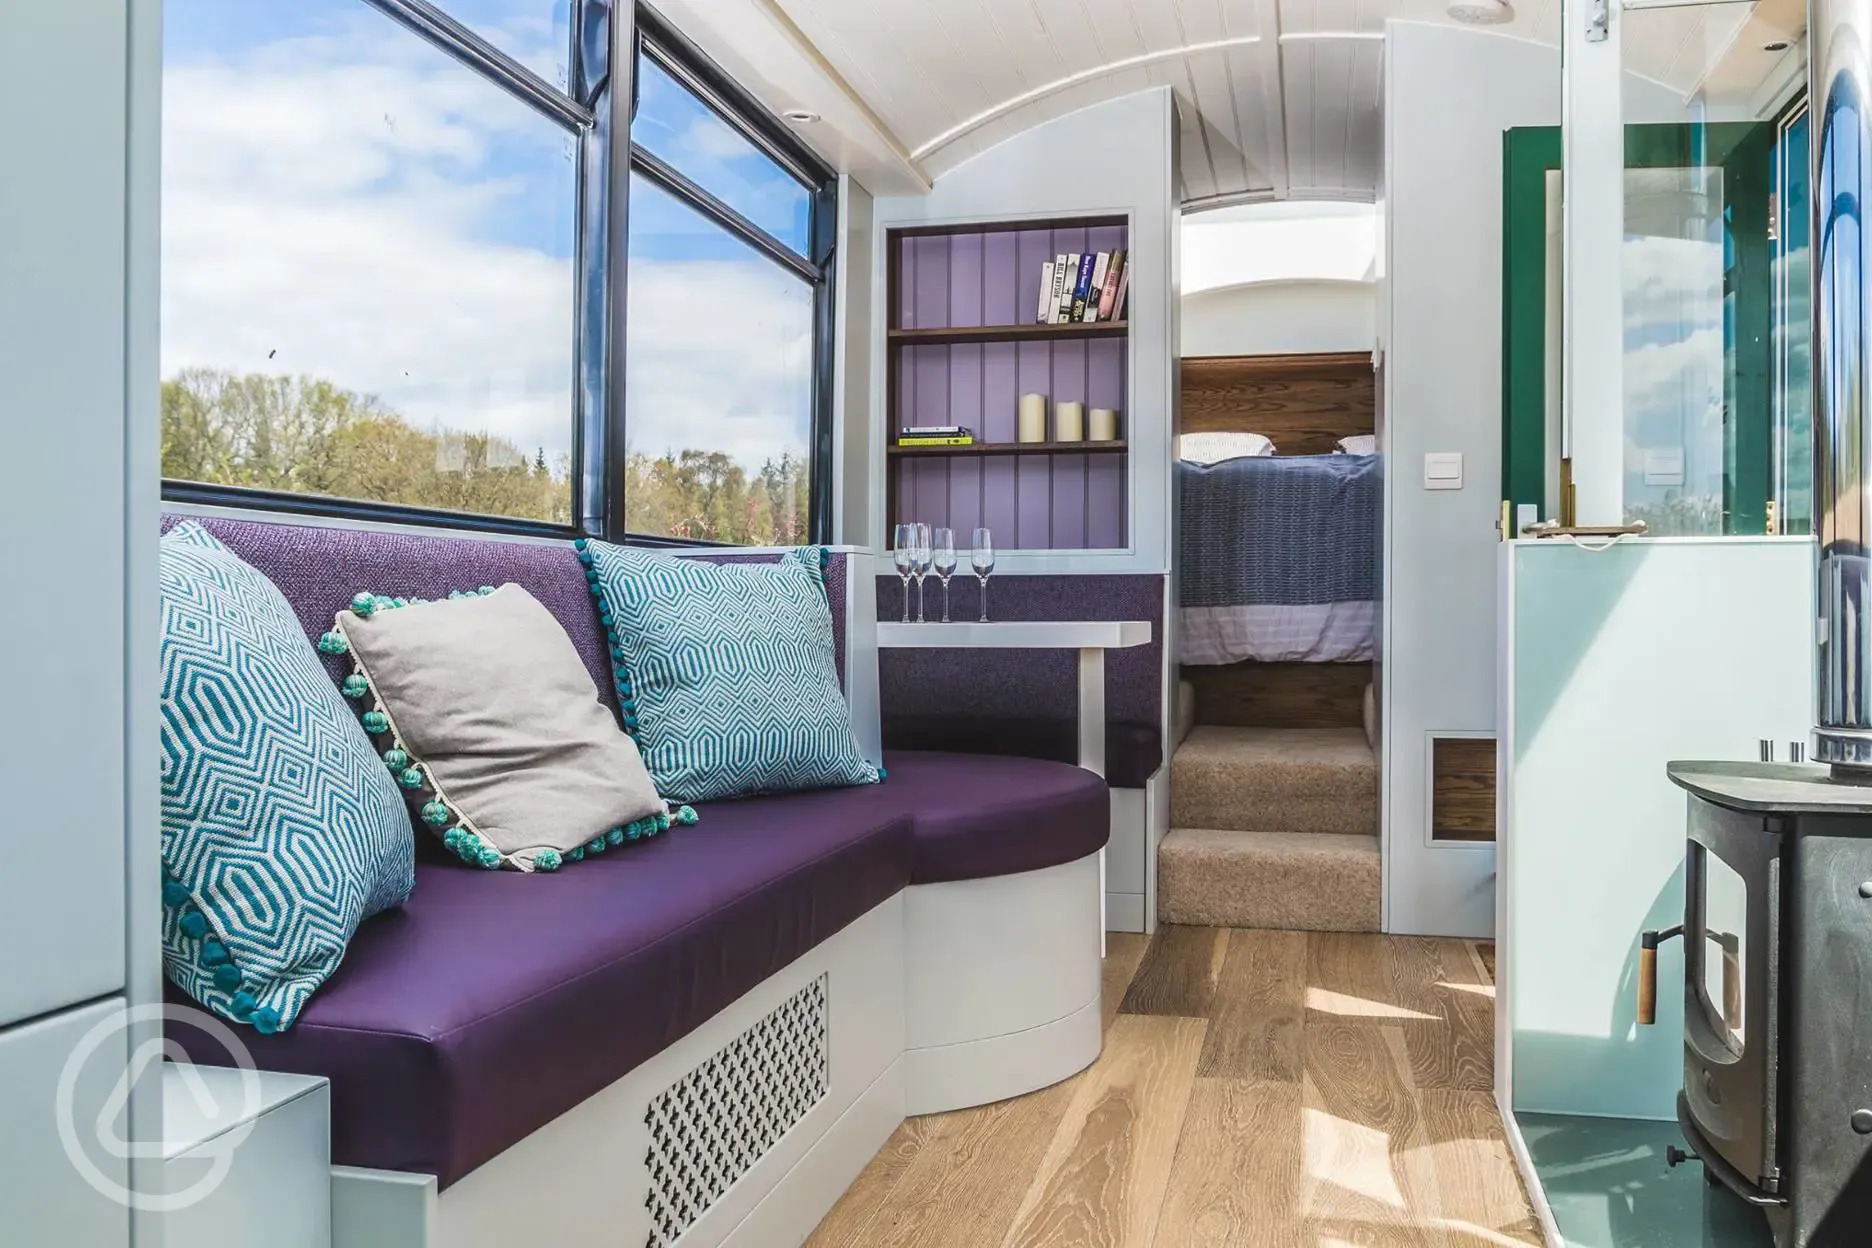 Luxury glamping bus - four person interior